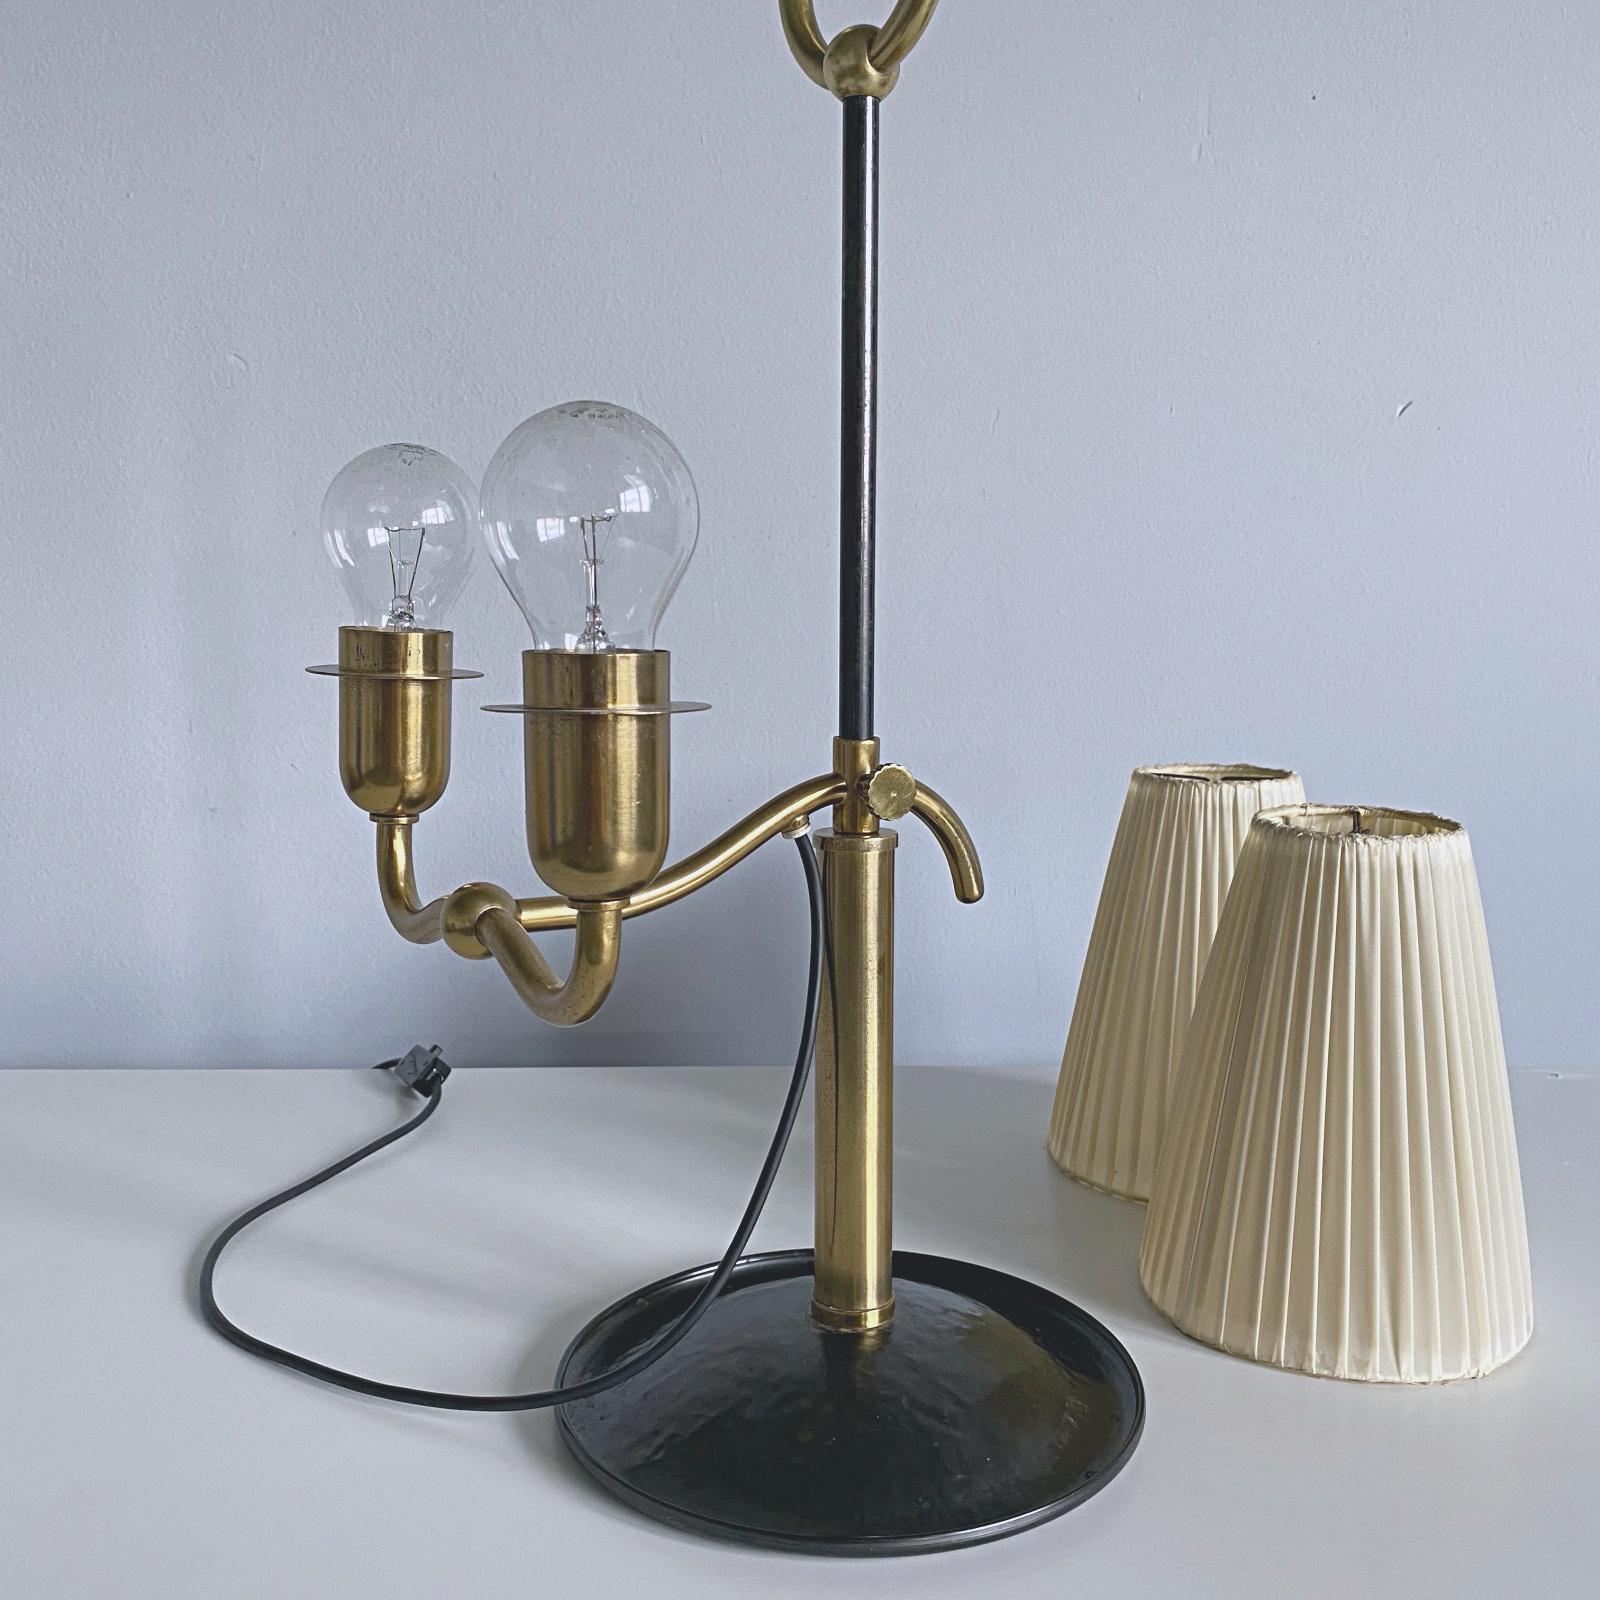 Josef Frank Two Light Brass Table Lamp, Viennese Modern Age, Austria For Sale 10